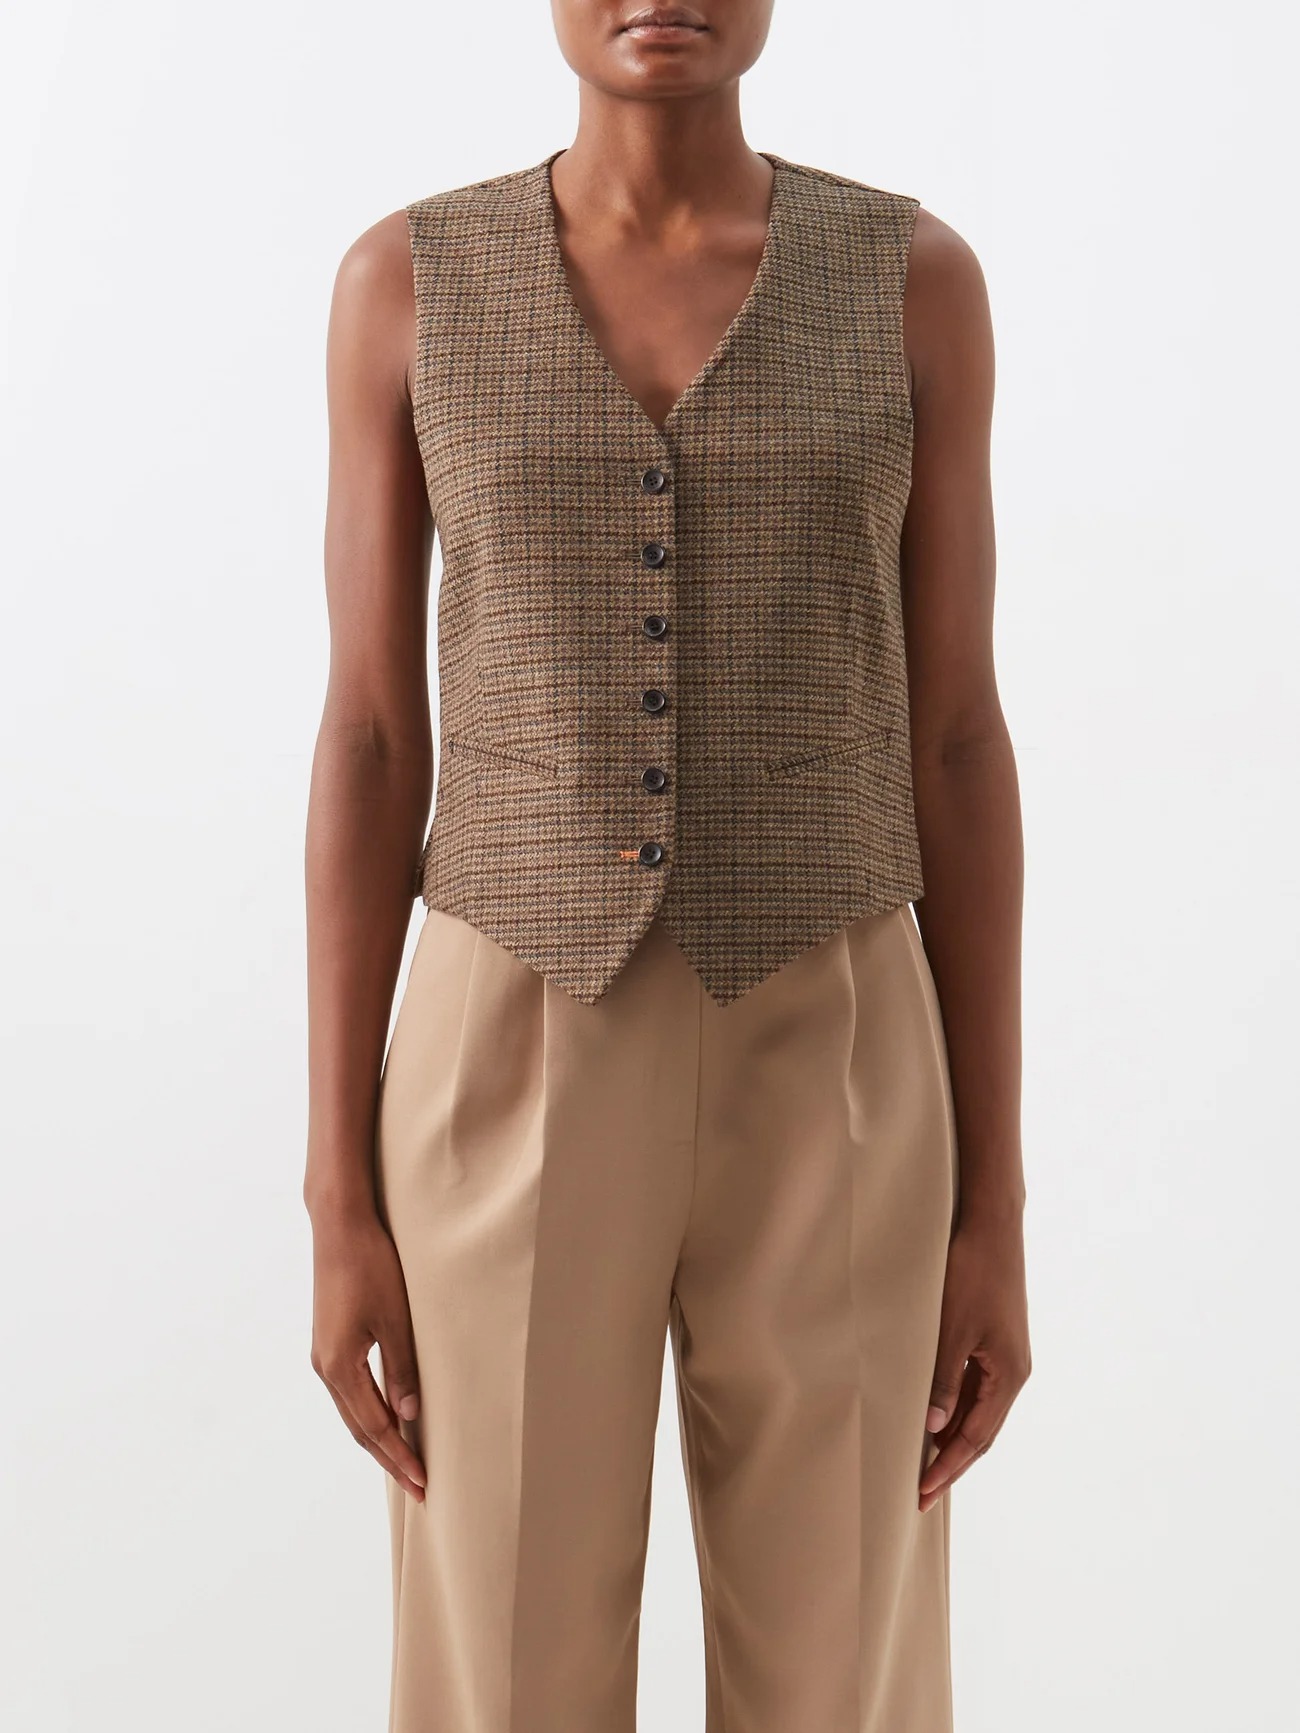 Suit vests and waistcoats for women from luxury designers, including boxy and classic cuts, and fashion versions in linen and corduroy.